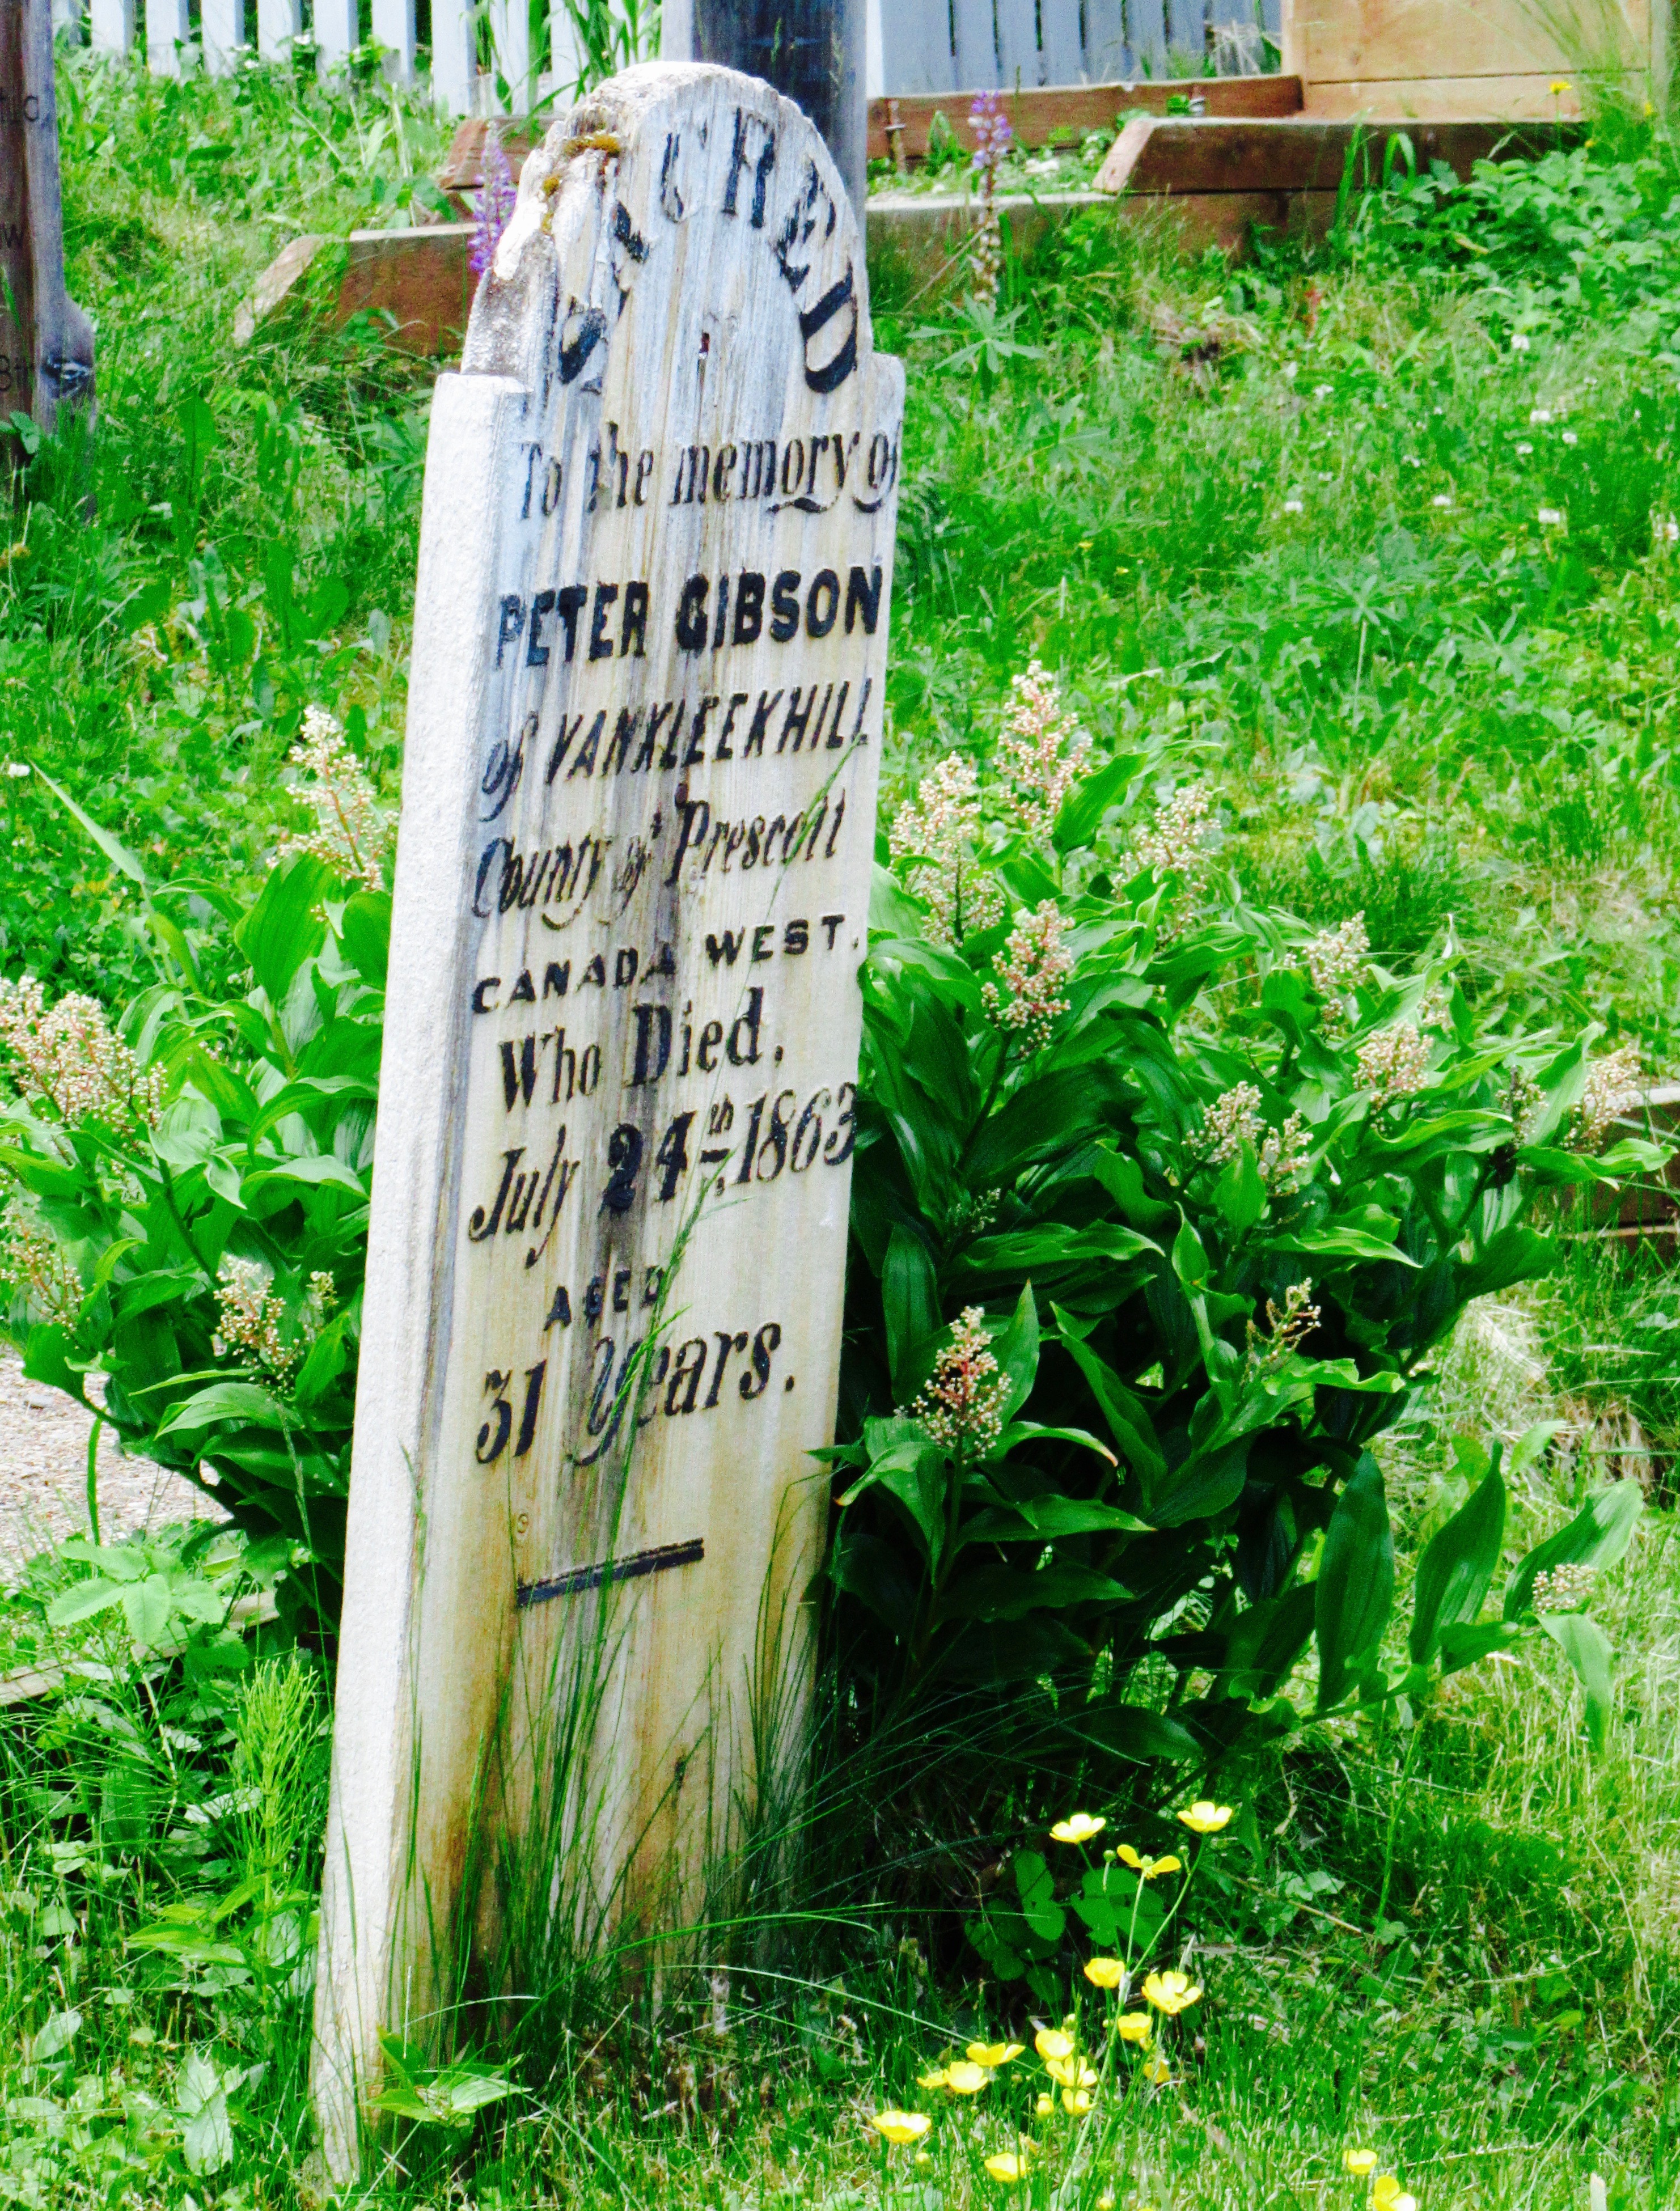 Wooden grave marker reading: Peter Gibson of Vankleekhill, County of Prescott, Canada West, who died July 24th 1863 aged 31 years.